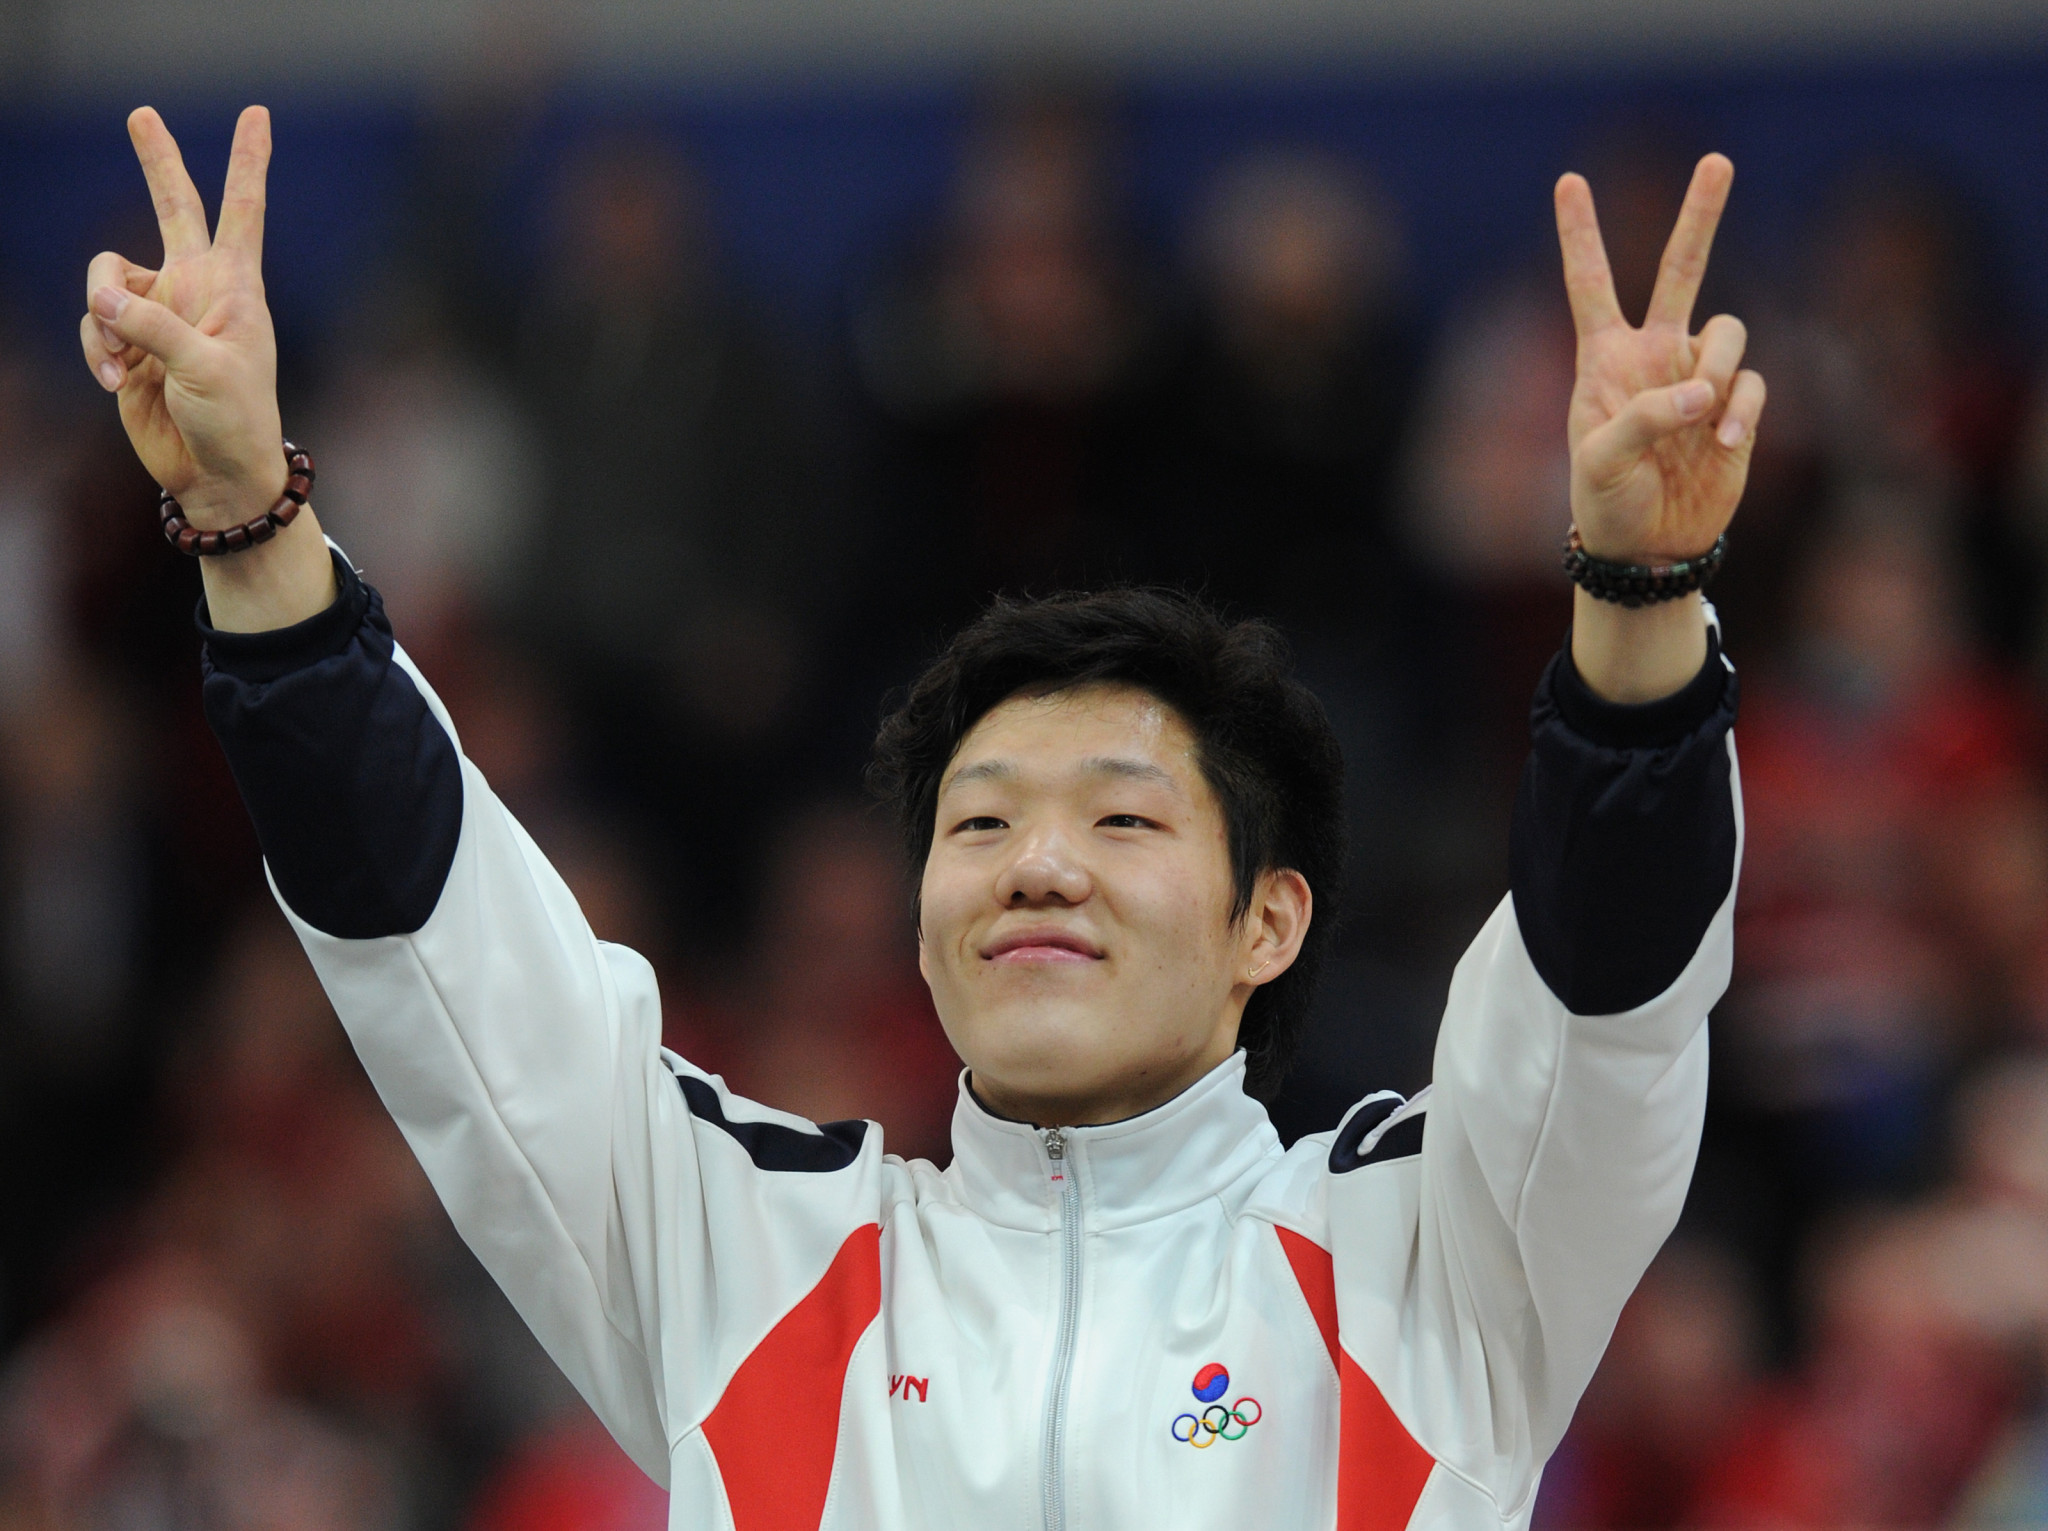 Mo Tae-bum is considering a switch to cycling after retiring from speed skating ©Getty Images